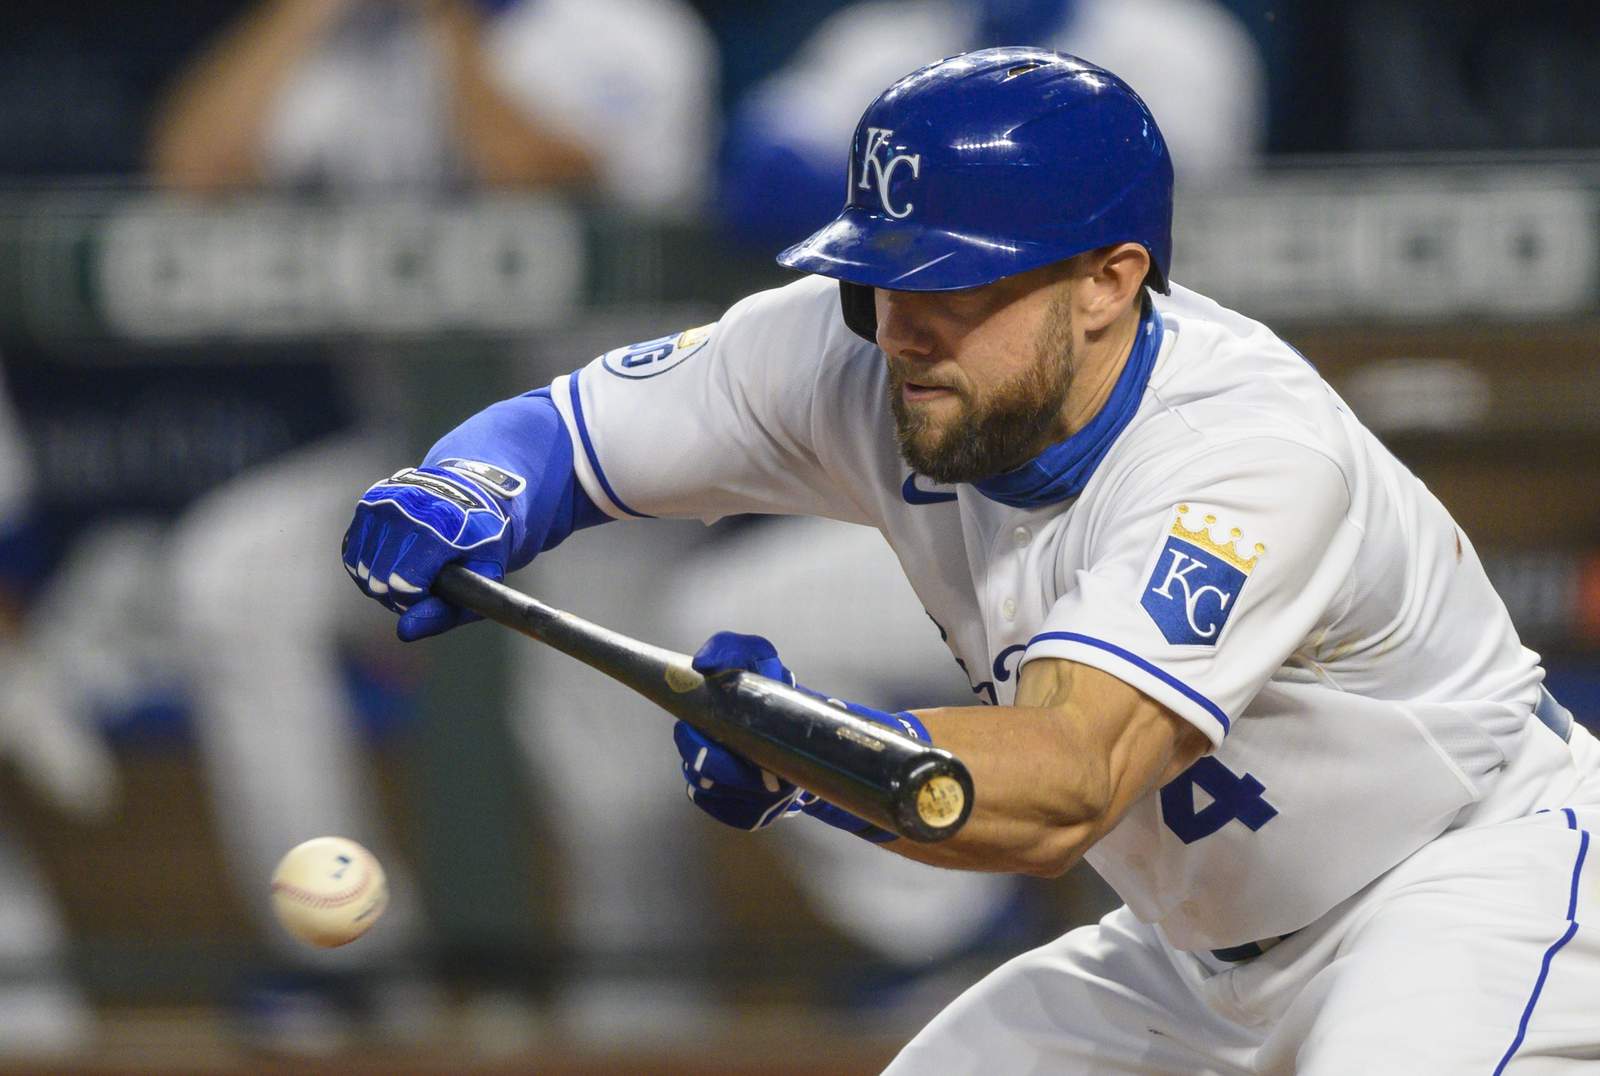 Alex Gordon retiring after playing entire career with Royals